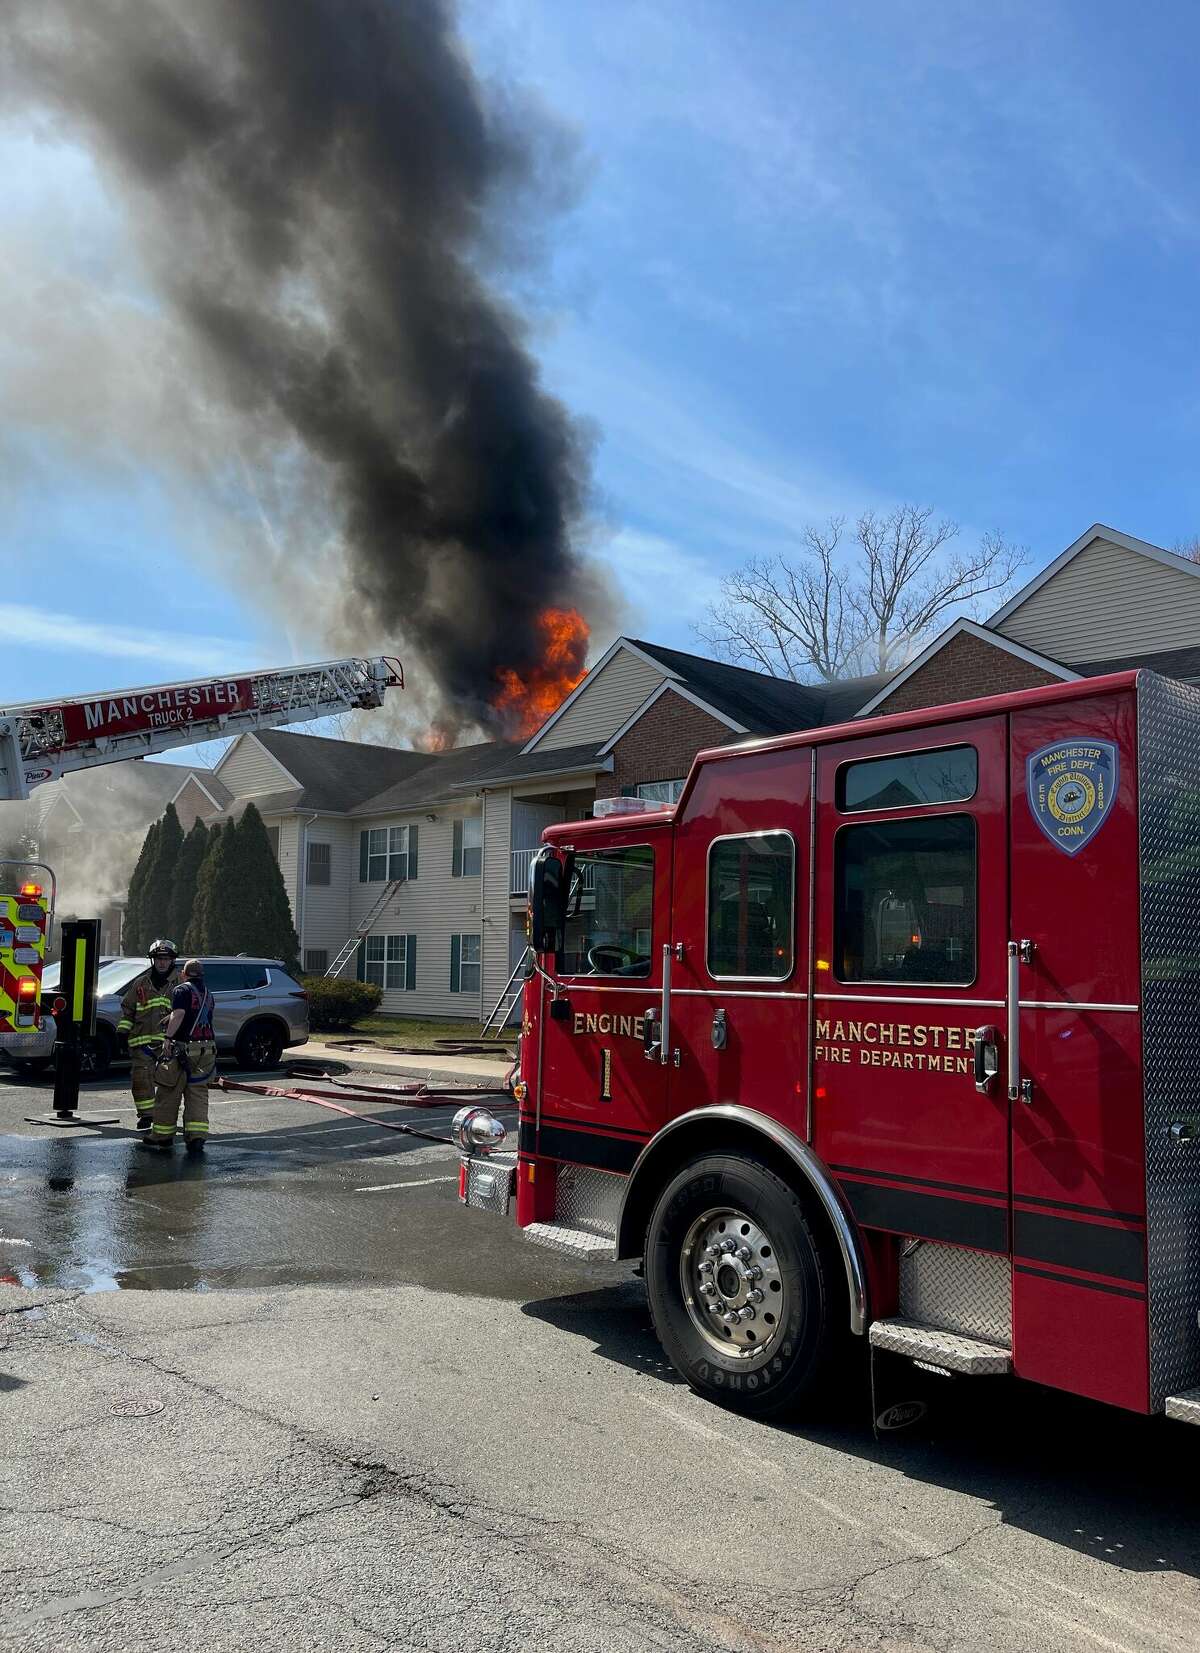 Firefighters battle a blaze at a Manchester apartment complex at 39 Buckland St. Thursday. More than 60 residents were displaced, officials said.